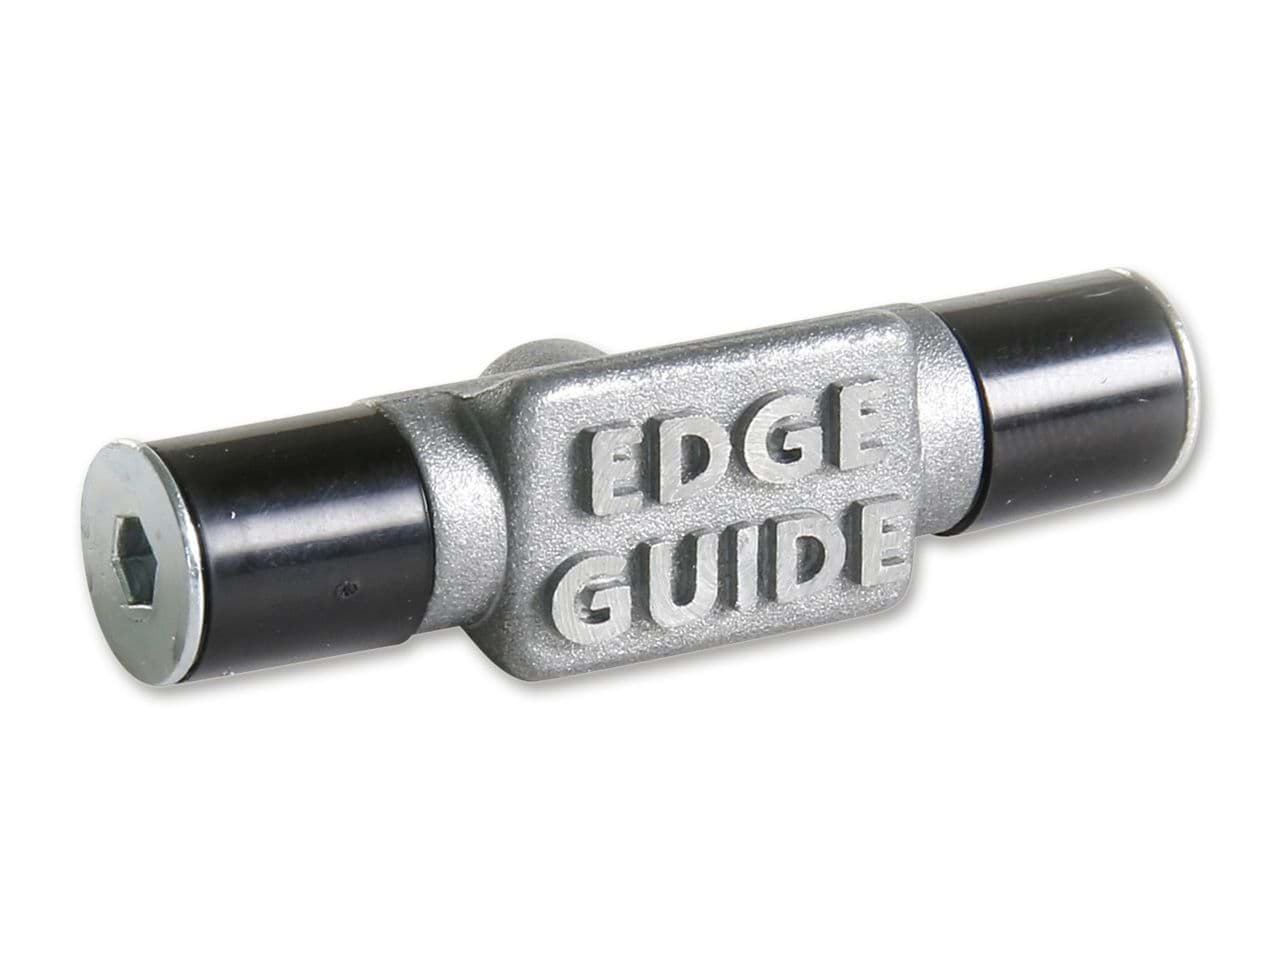 Picture of Work Sharp - WSKTS KOE Edge Guide